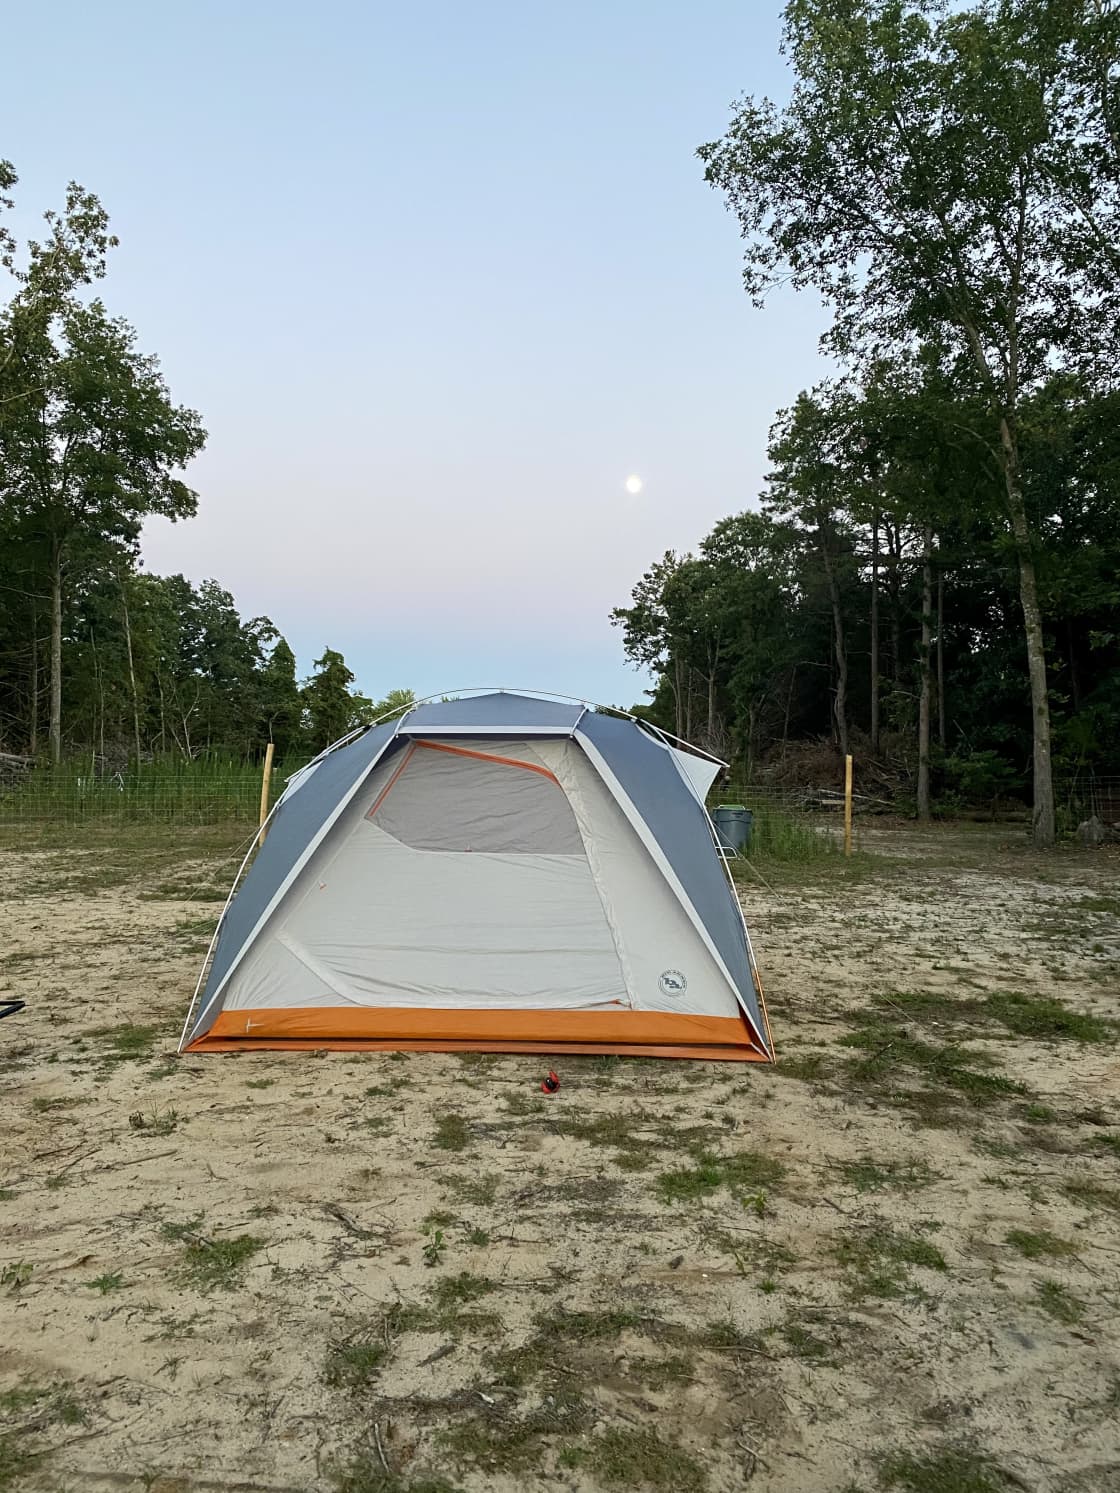 Open Field for Dry Camping